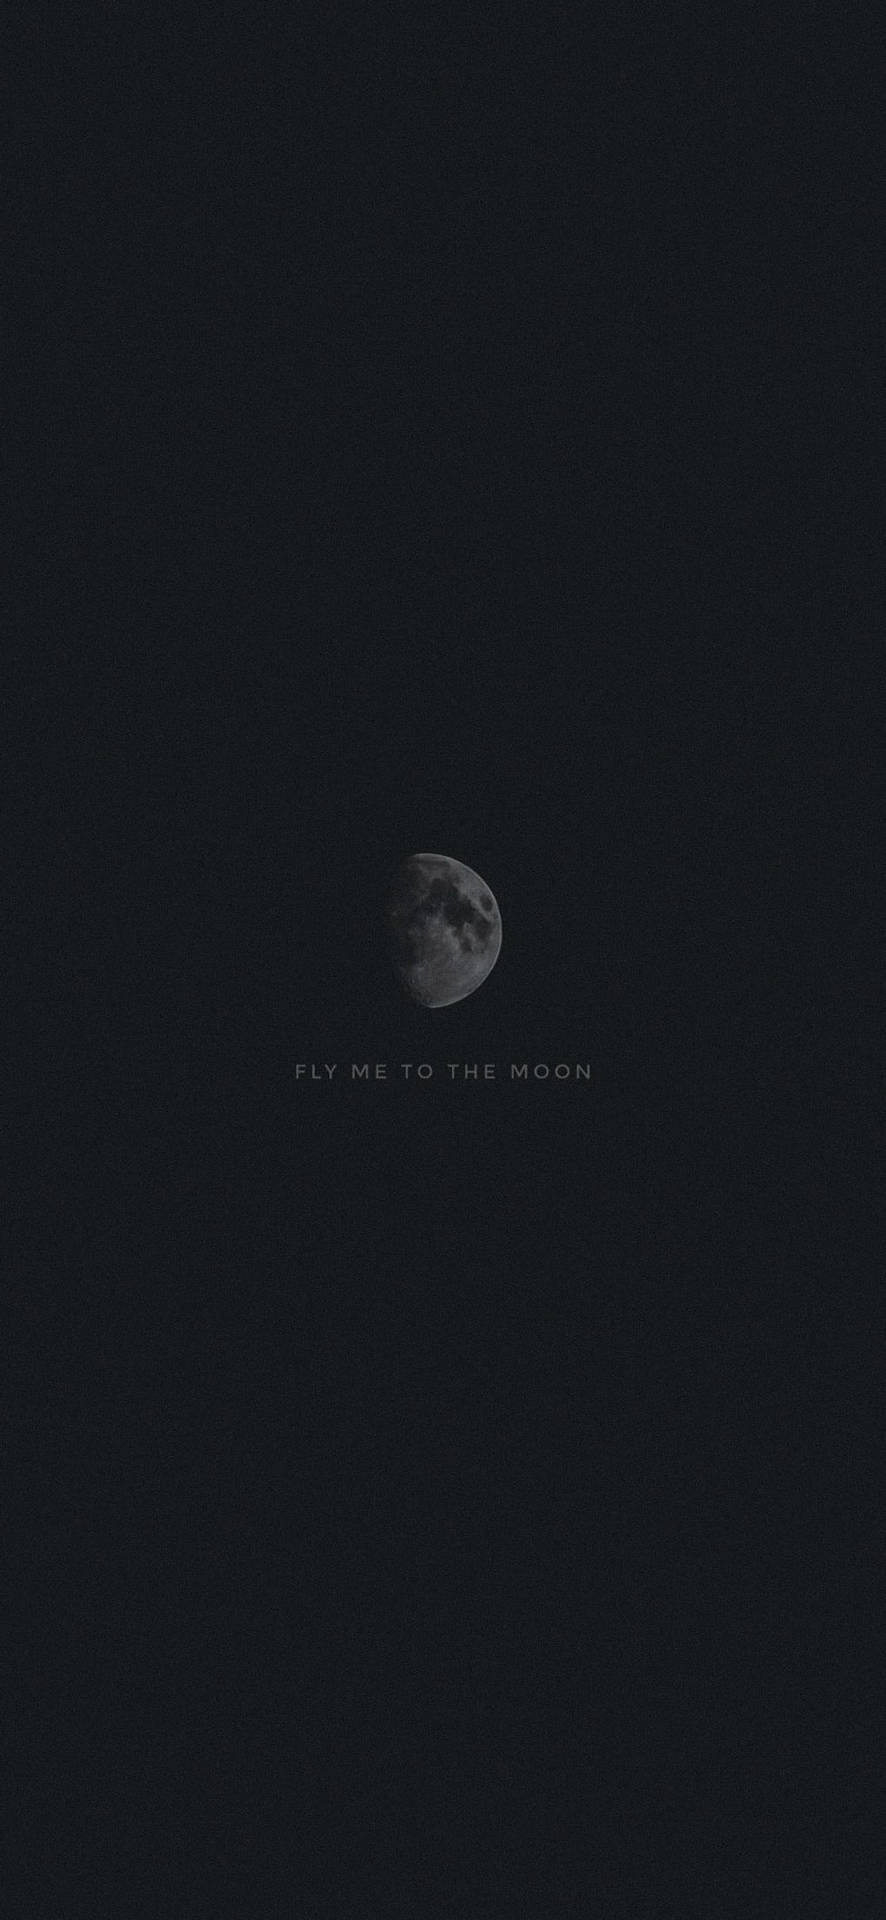 Luna Fly Me To The Moon Background